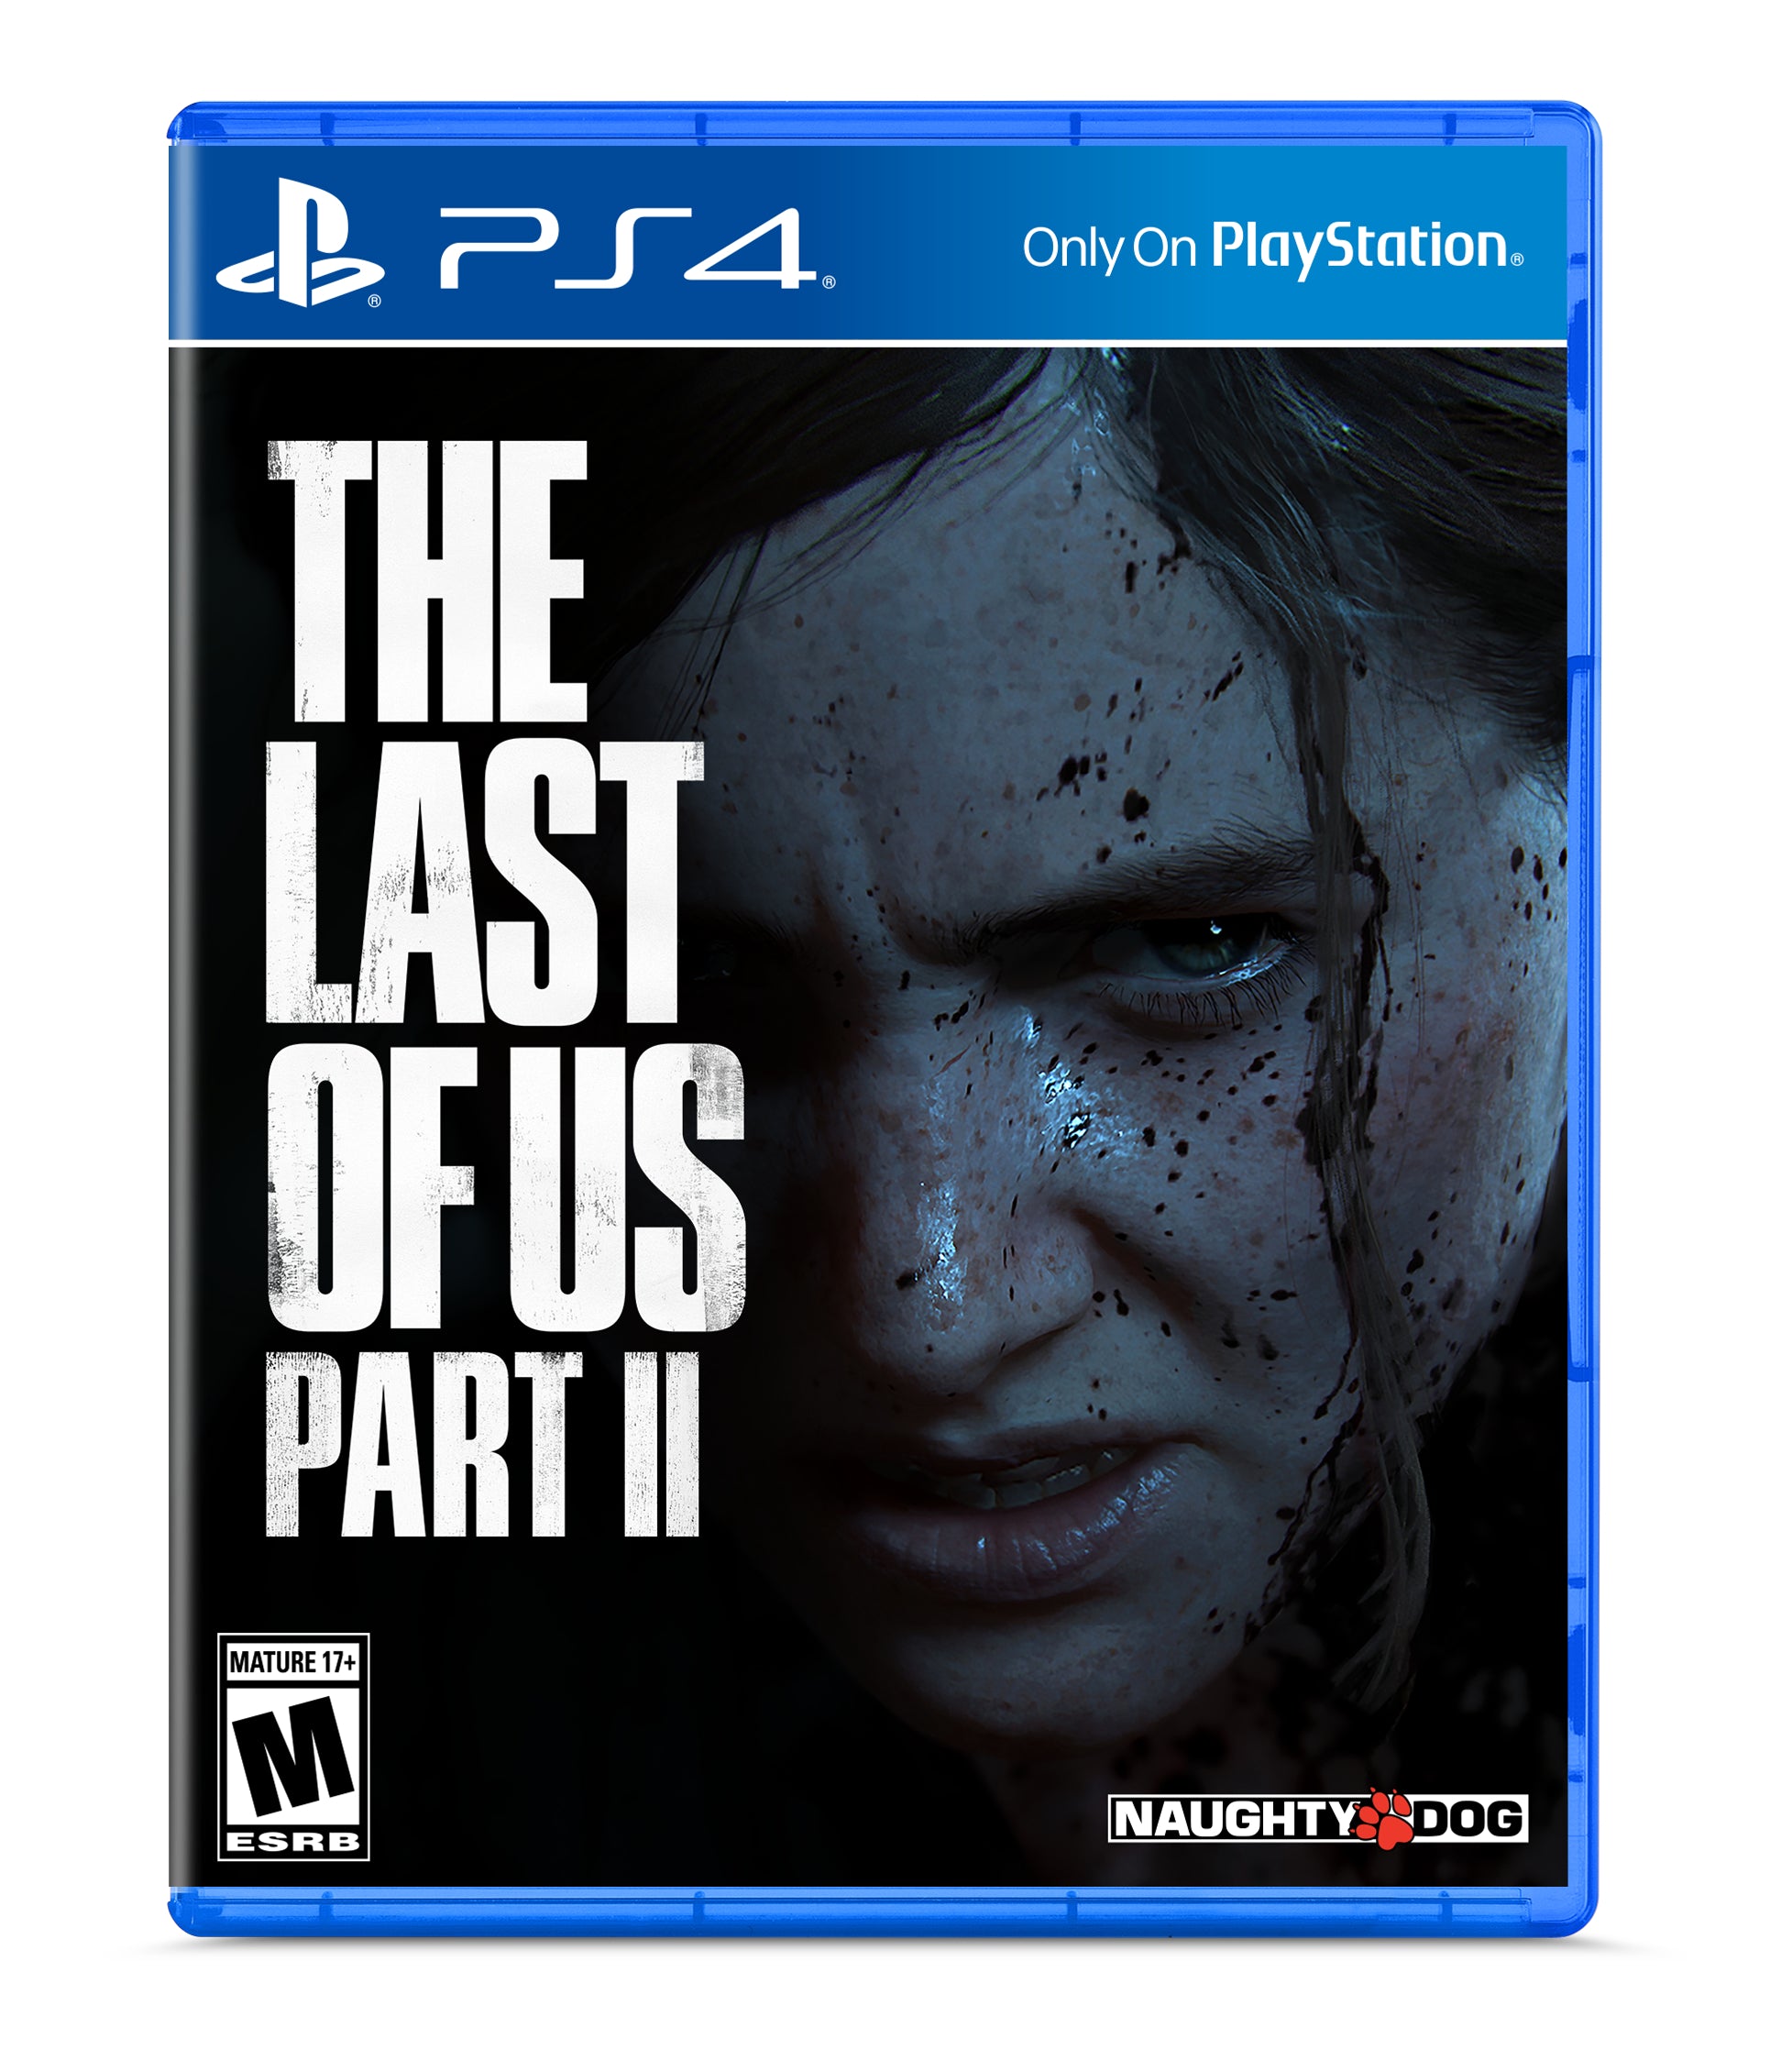 Sony PlayStation 4 Slim The Last of Us Part II Bundle 1TB PS4 Gaming Console, Jet Black, with Mytrix Chat Headset